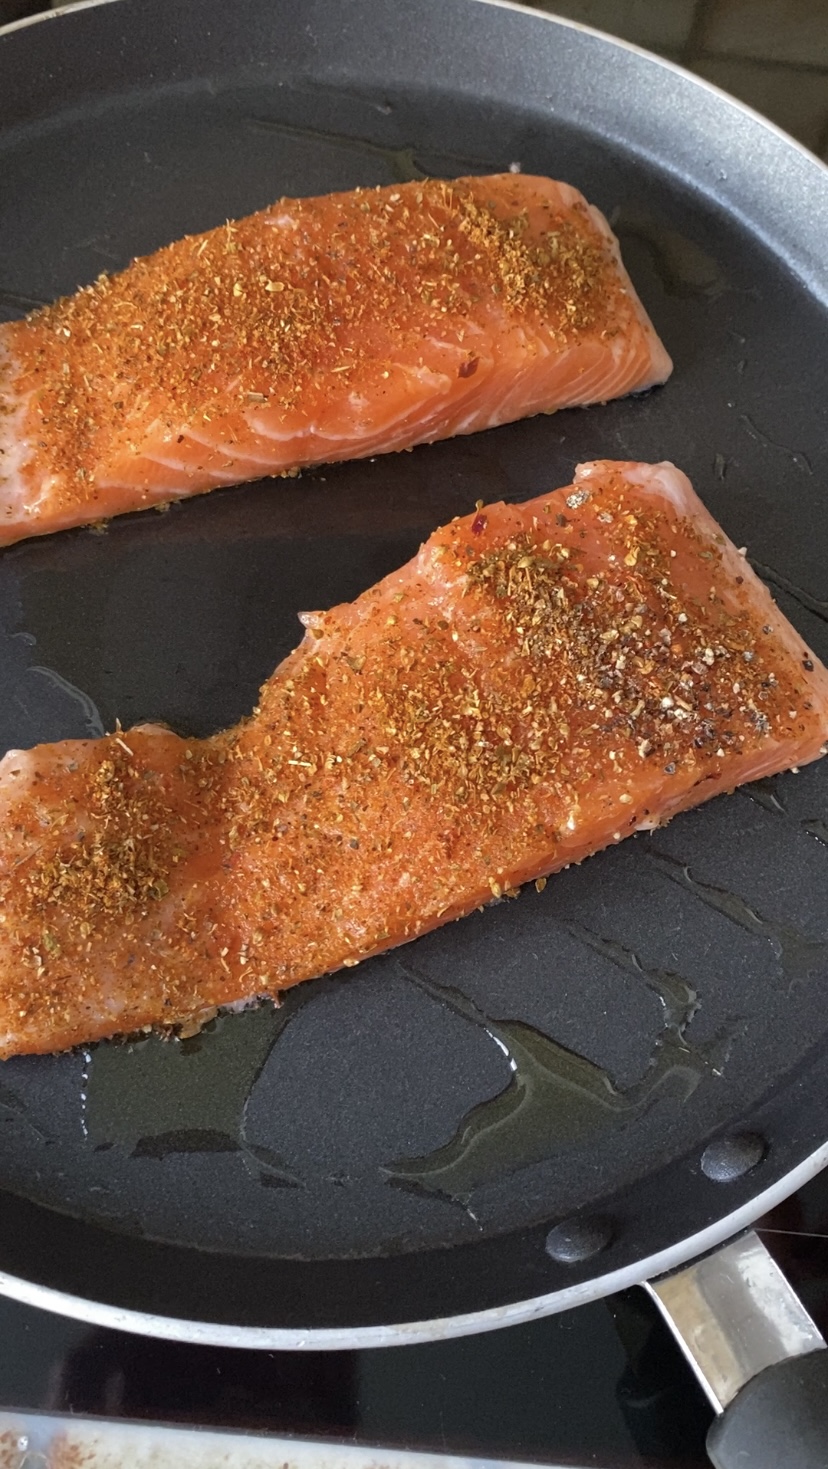 Salmon fillets cooking in a frying pan with olive oil.